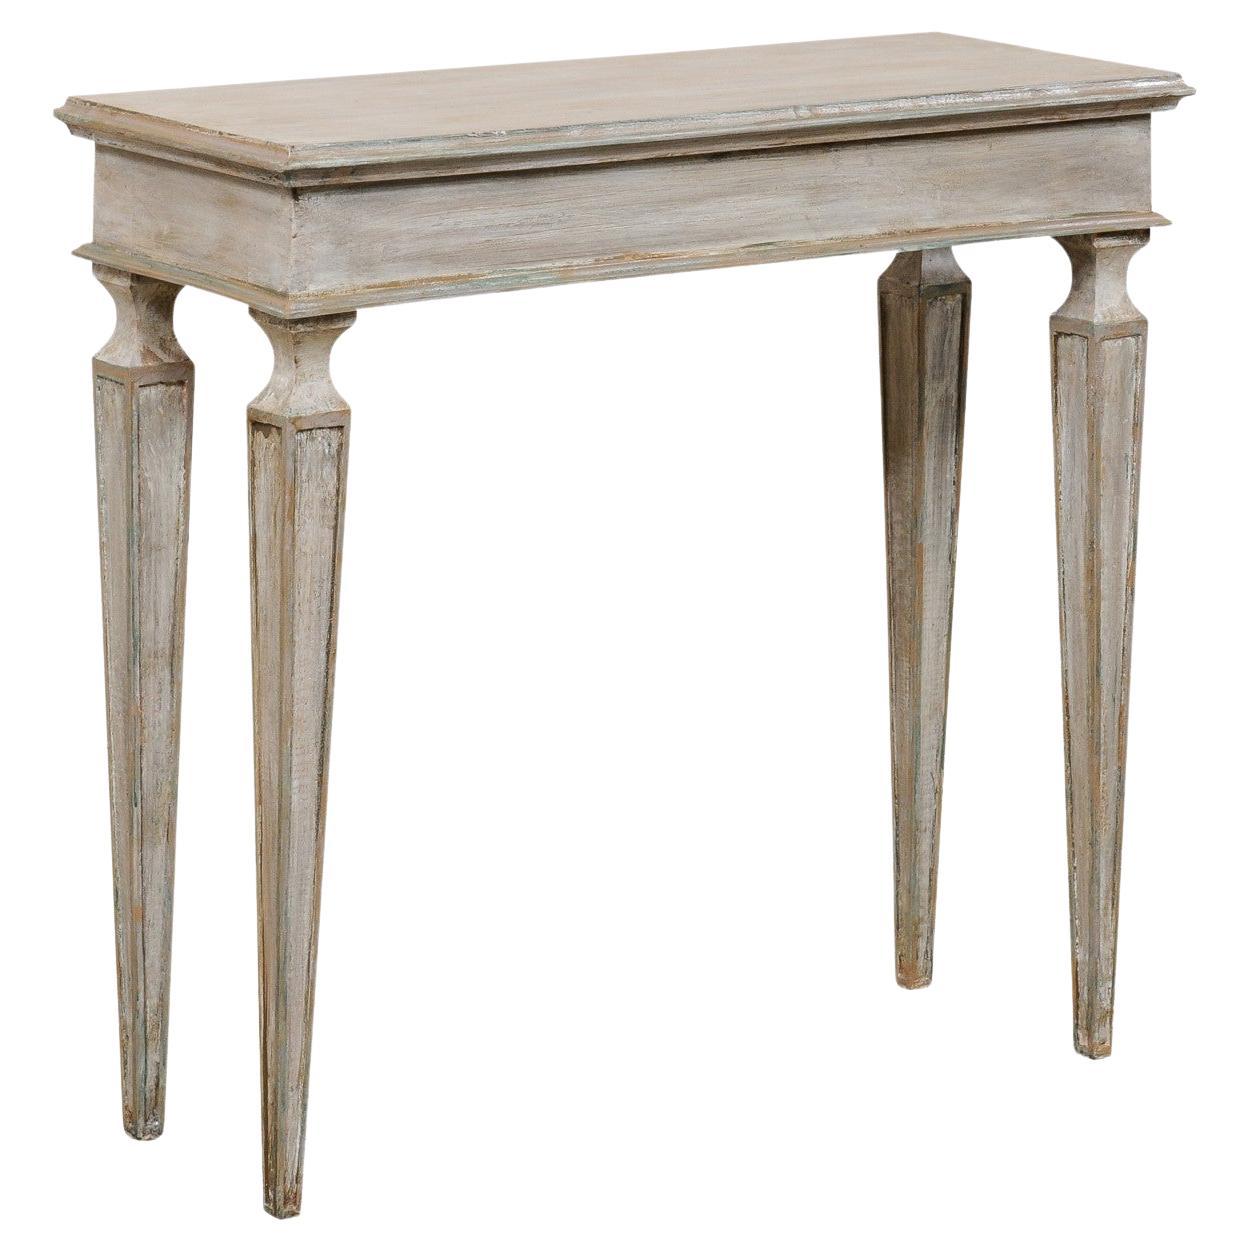 Italian Carved & Painted Wood Console Table, Cute